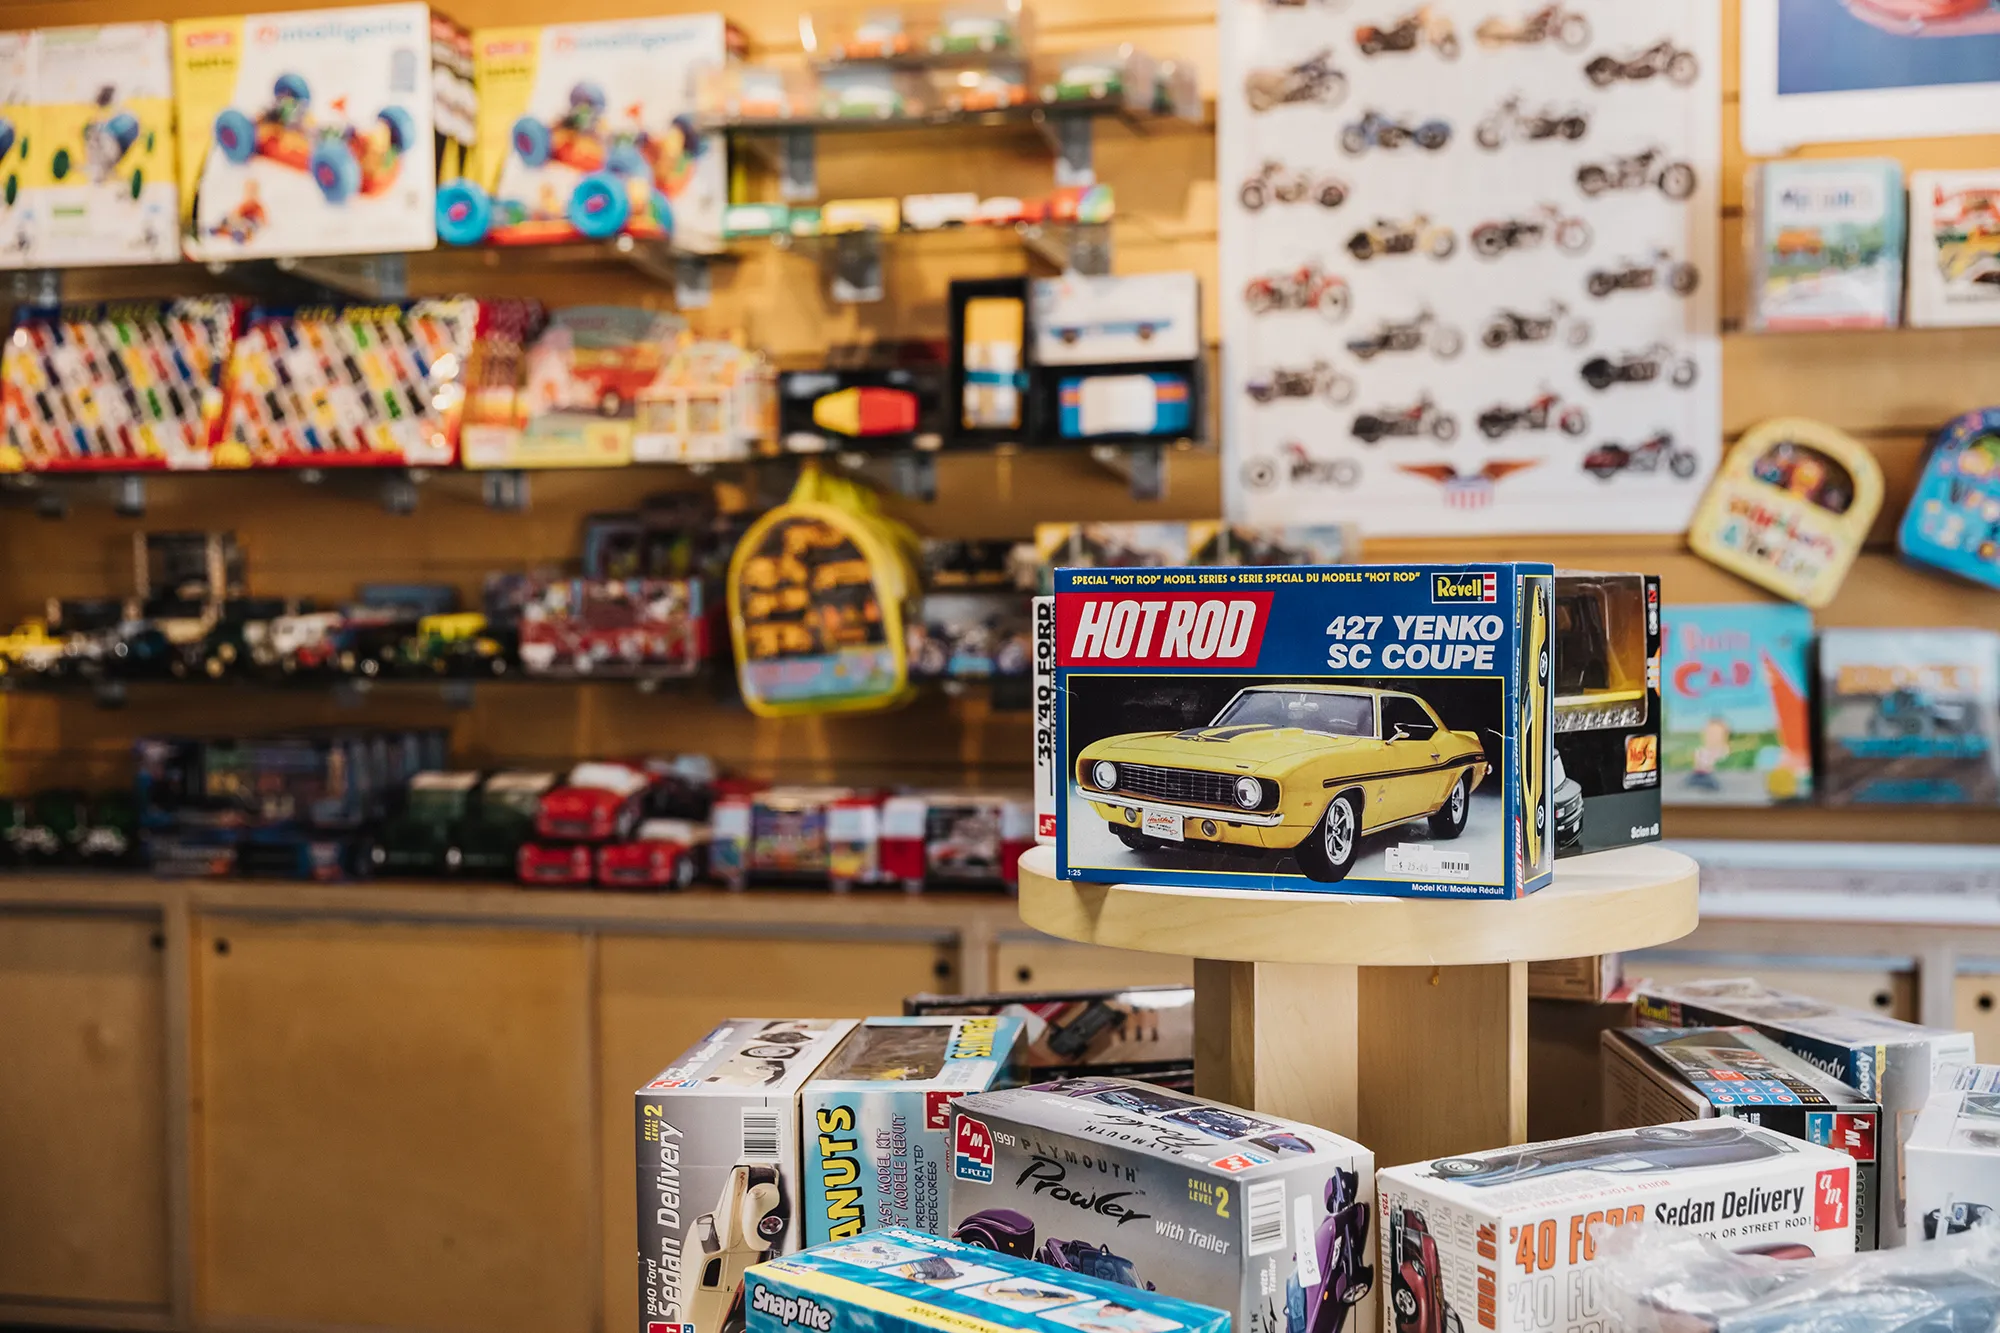 Displays of various model cars inside the San Diego Automotive Museum gift shop.